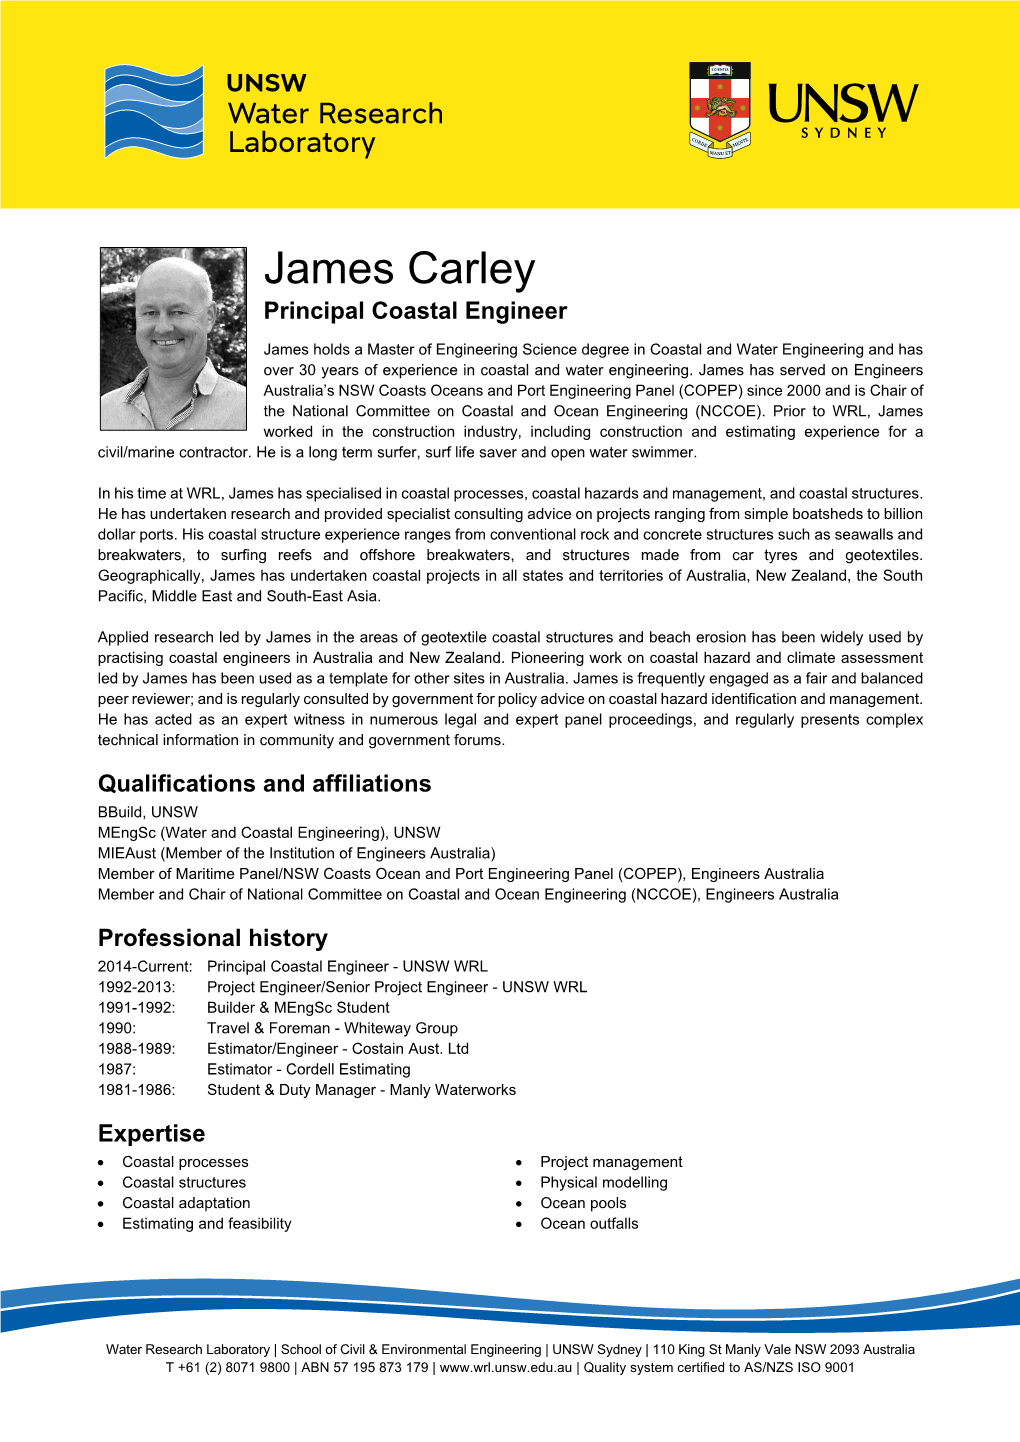 James Holds a Master of Engineering Science Degree in Coastal and Water Engineering and Has Over 30 Years of Experience in Coastal and Water Engineering